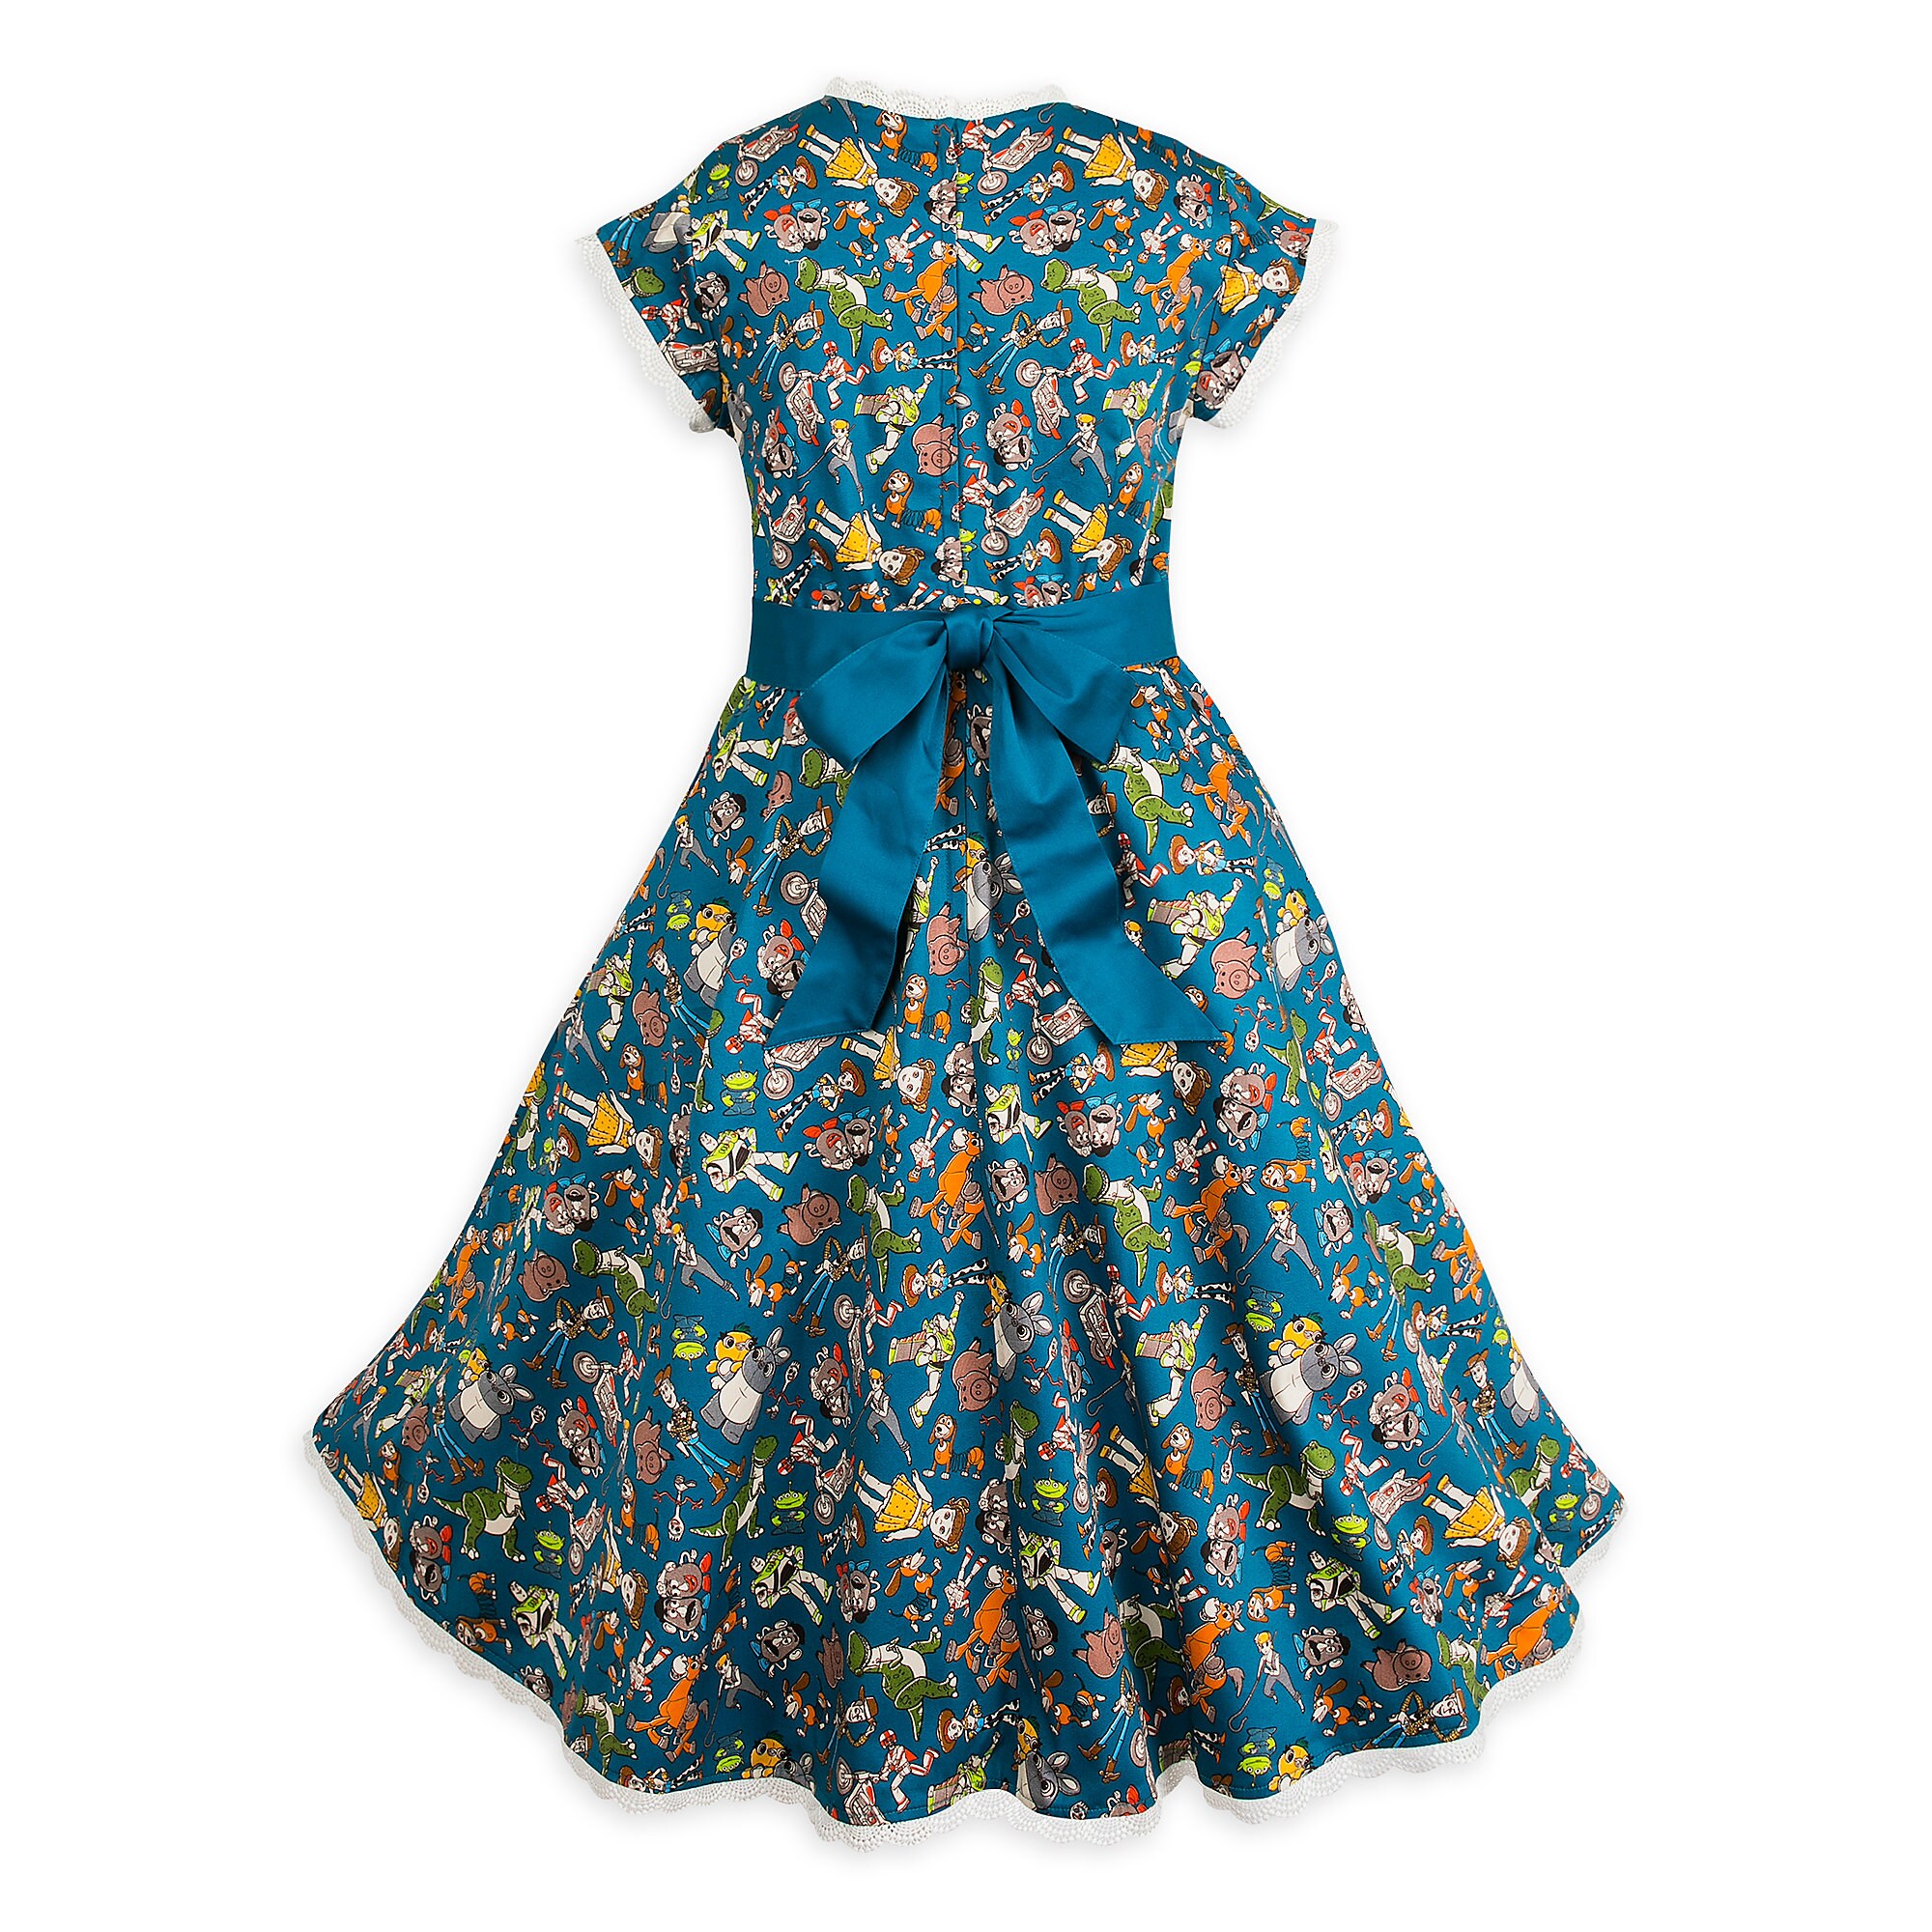 Toy Story 4 Dress for Women